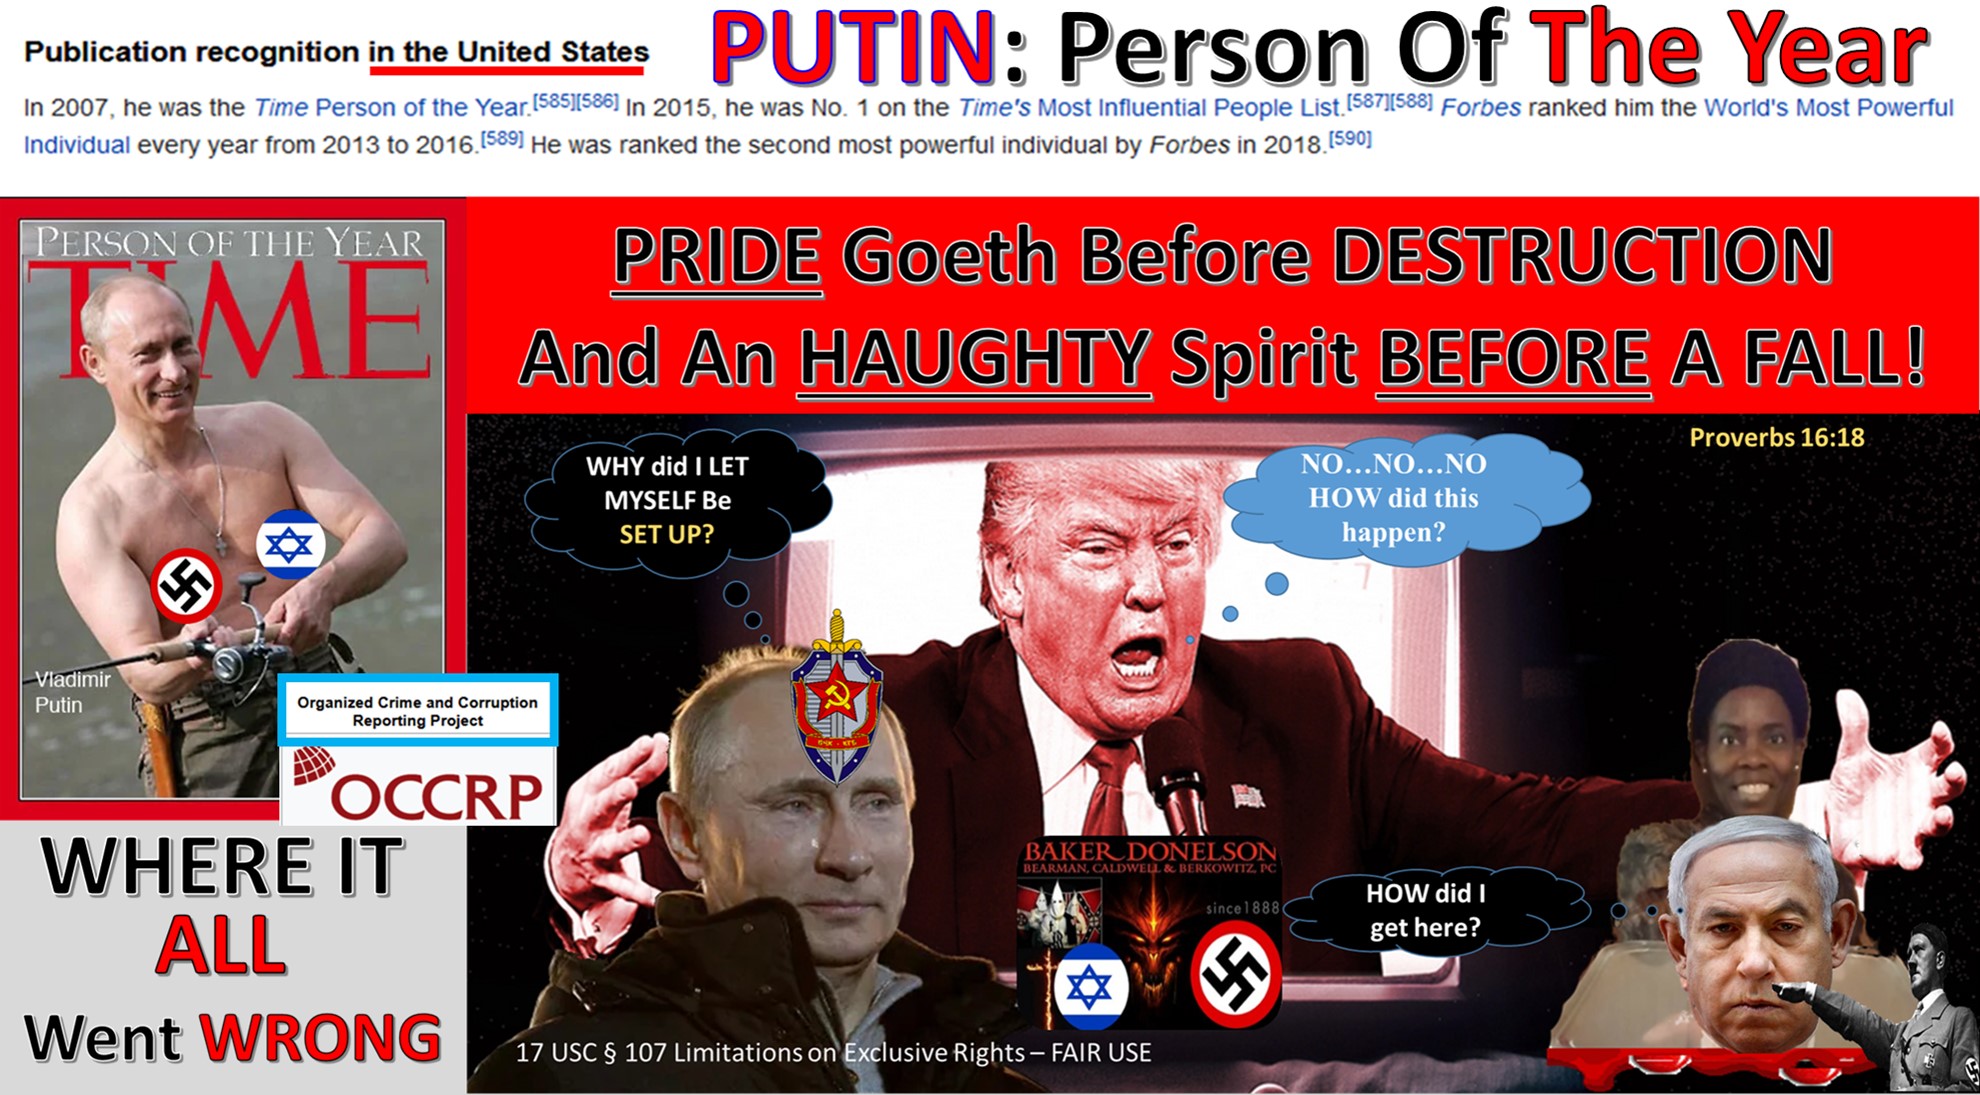 PUTIN Person Of The Year